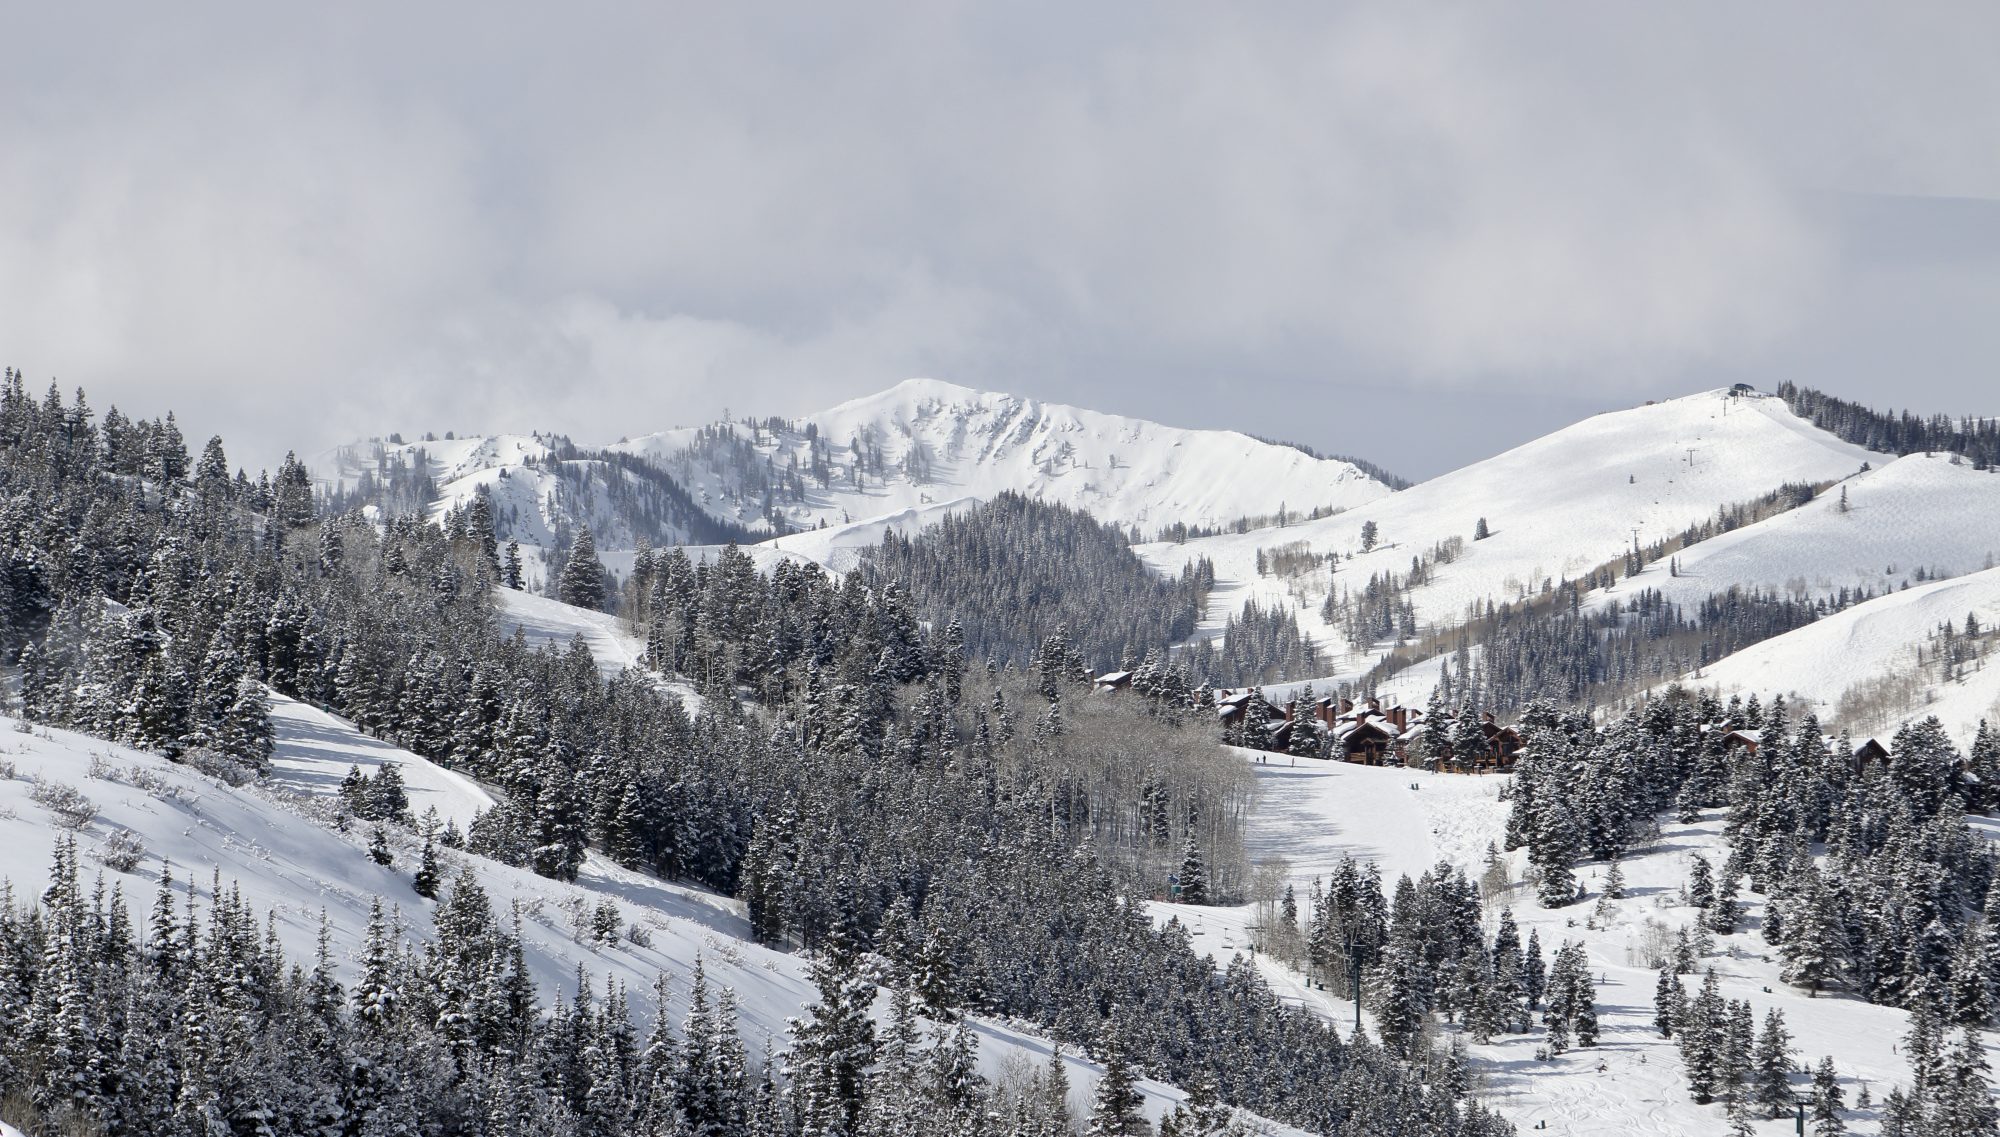 Deer Valley Resort overview - Photo: Deer Valley Resort. Deer Valley who was awarded Best US Ski Resort by the World Ski Awards for the sixth year, opens this Saturday December 8th.